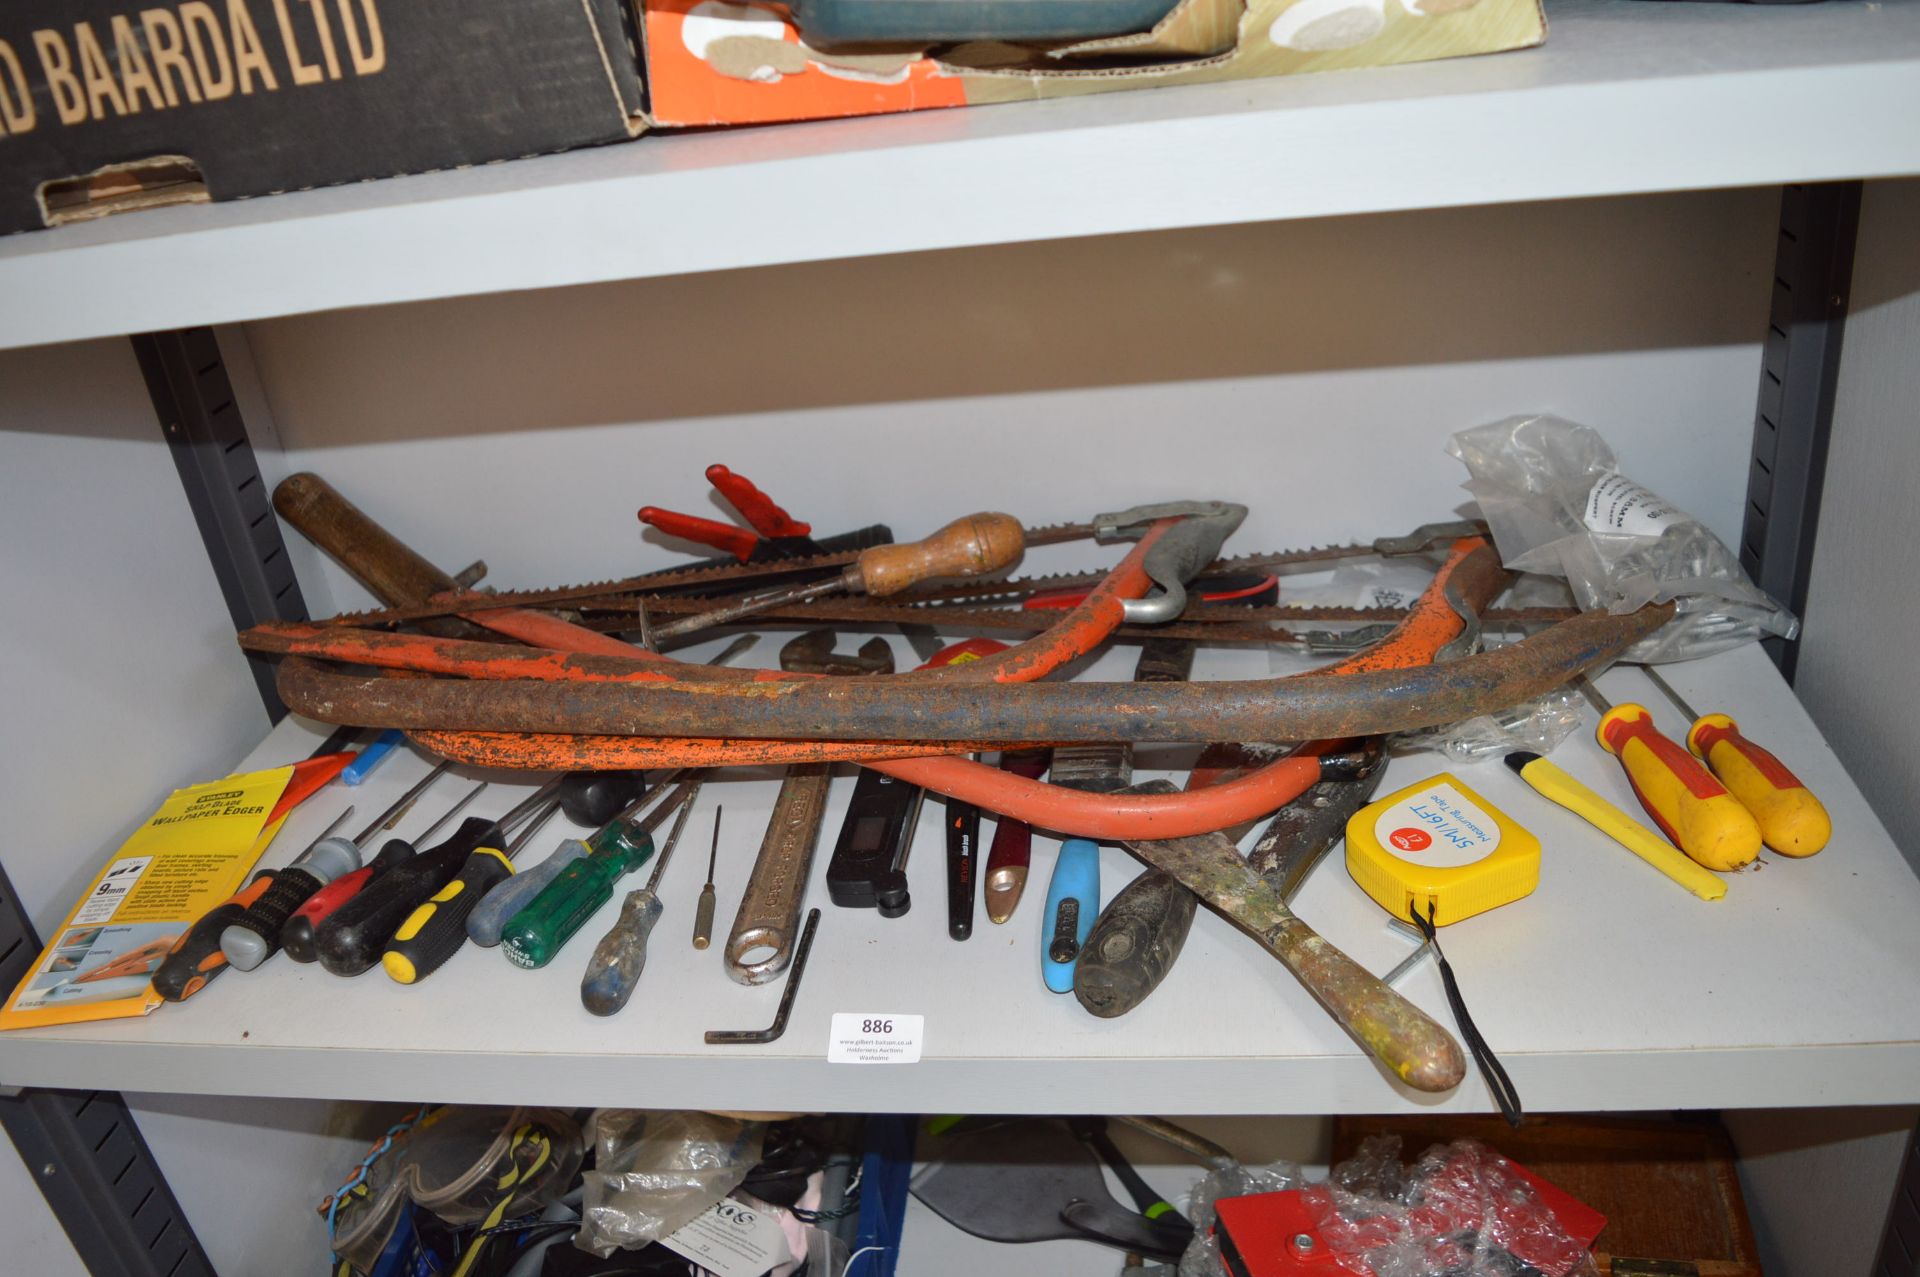 Contents of Shelf to Include Screwdrivers, Spanners, Bow Saws, etc.